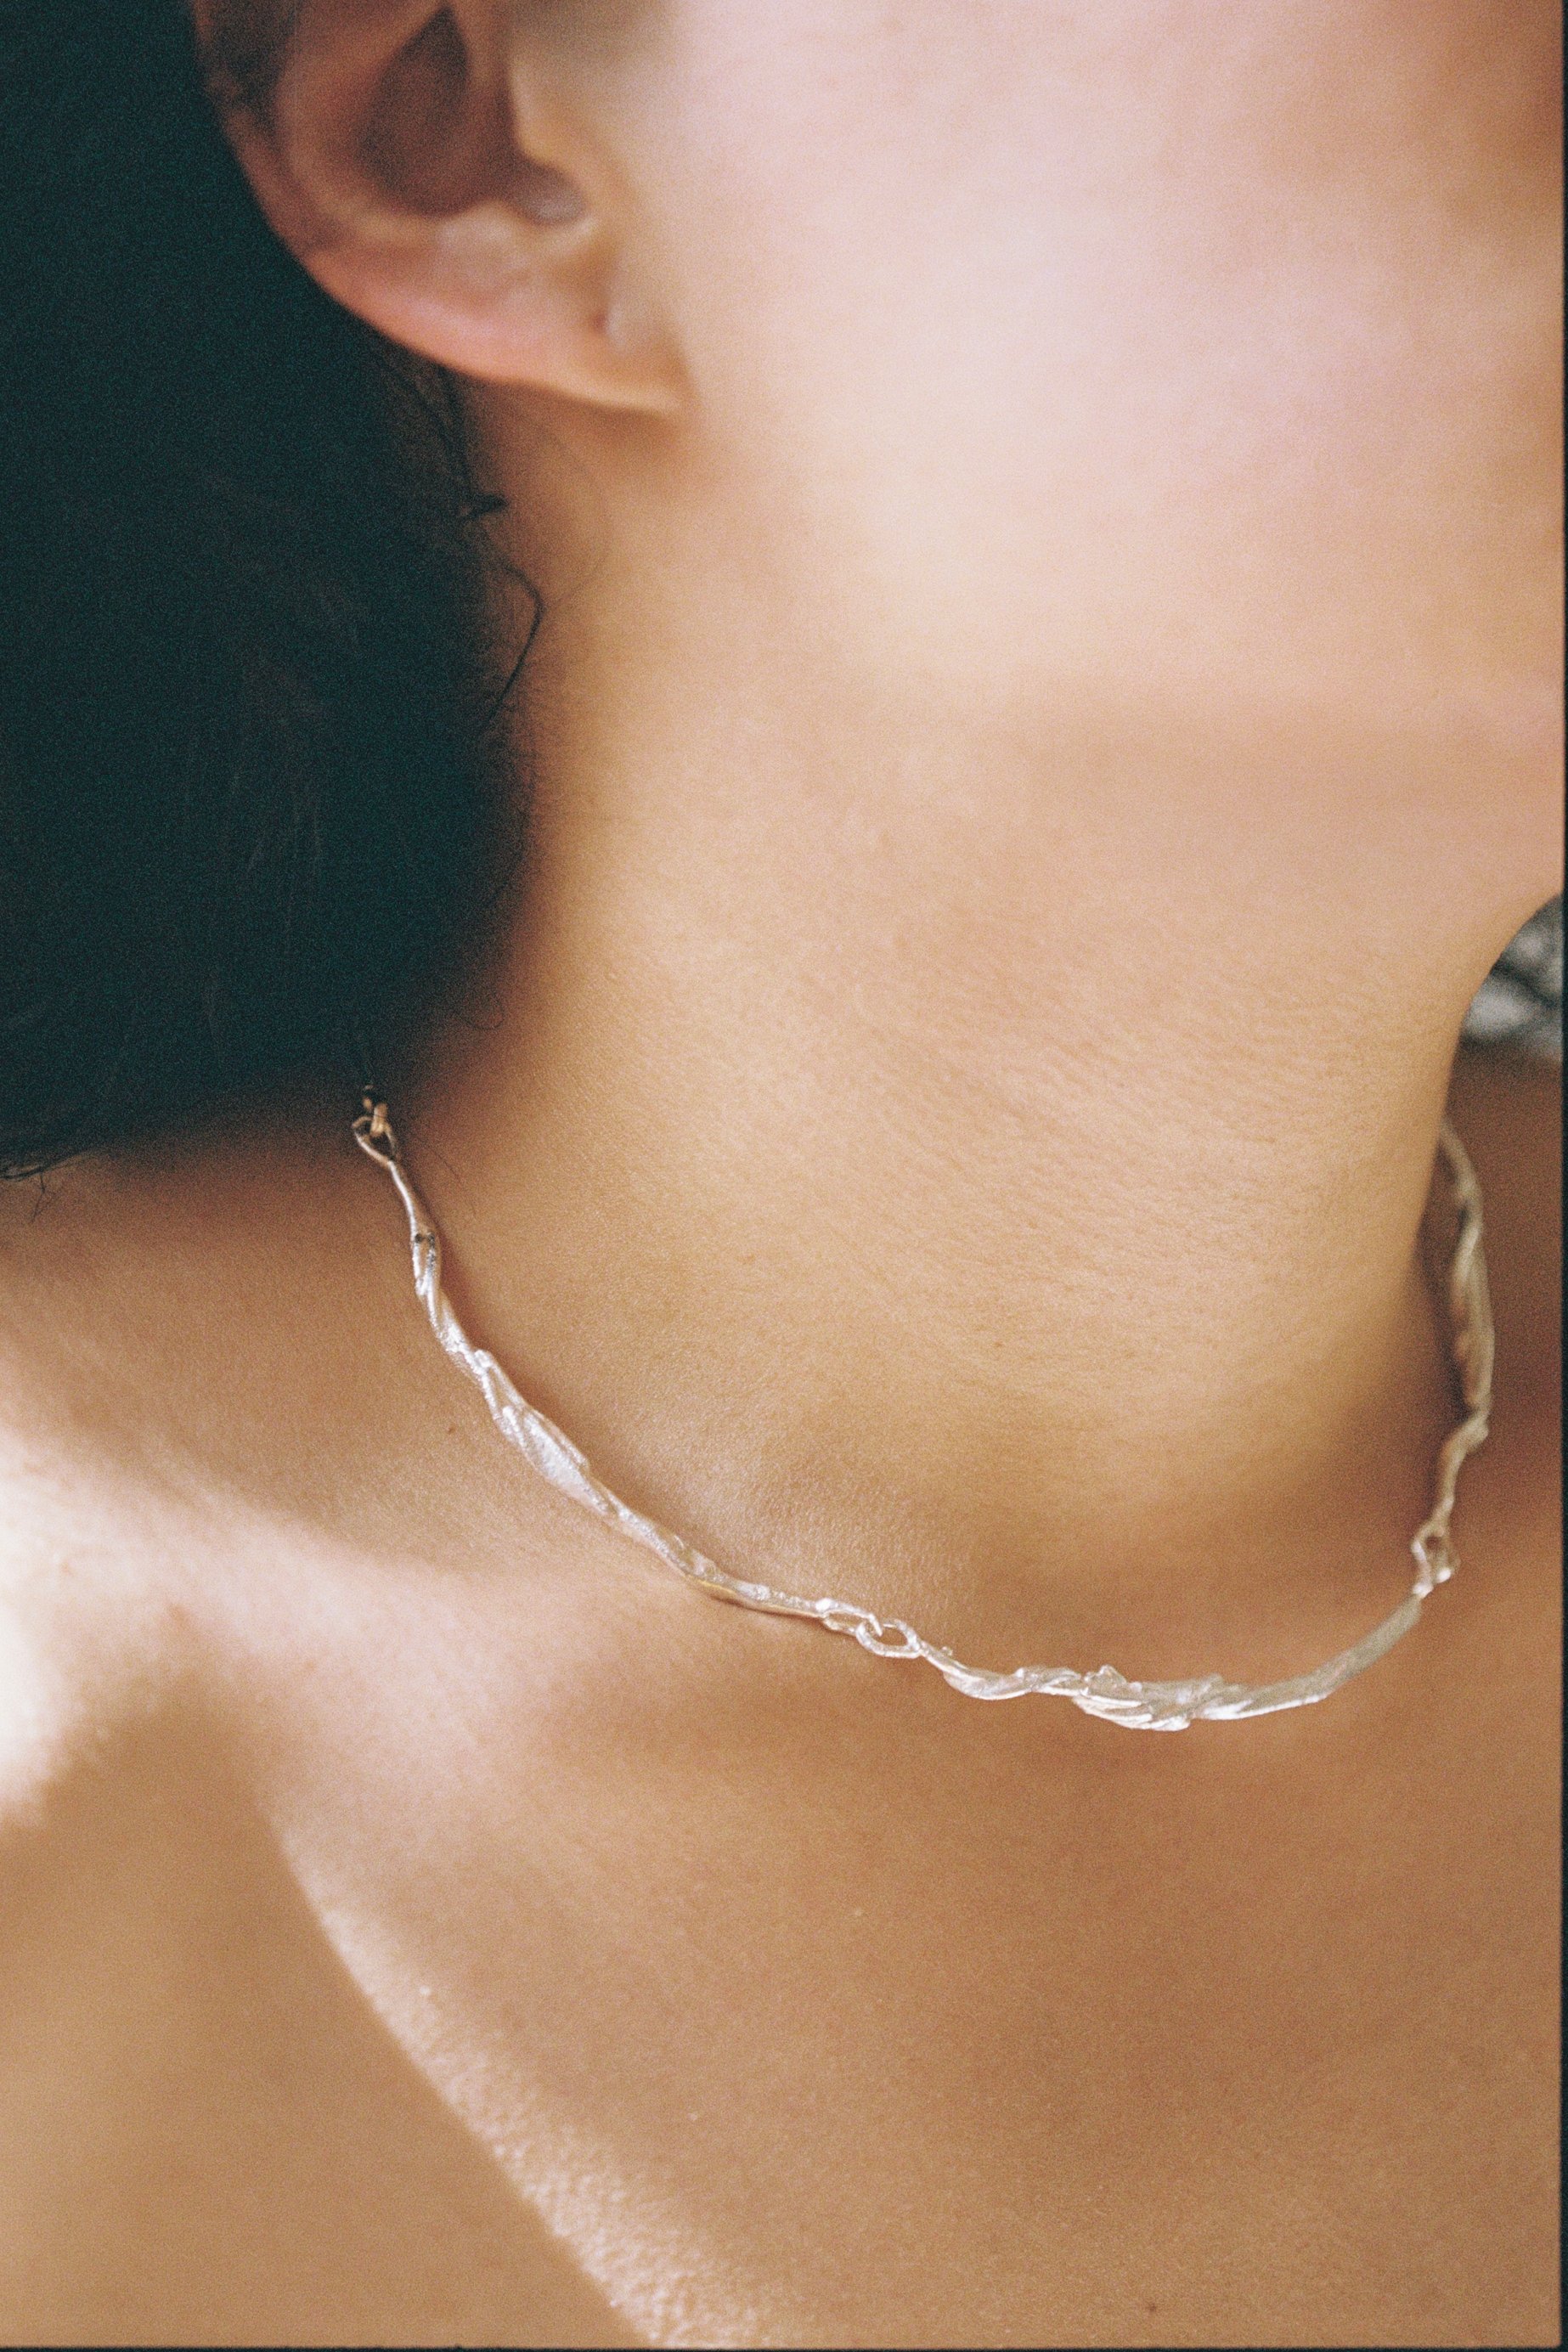 Image of Edition 5. Piece 7. Necklace